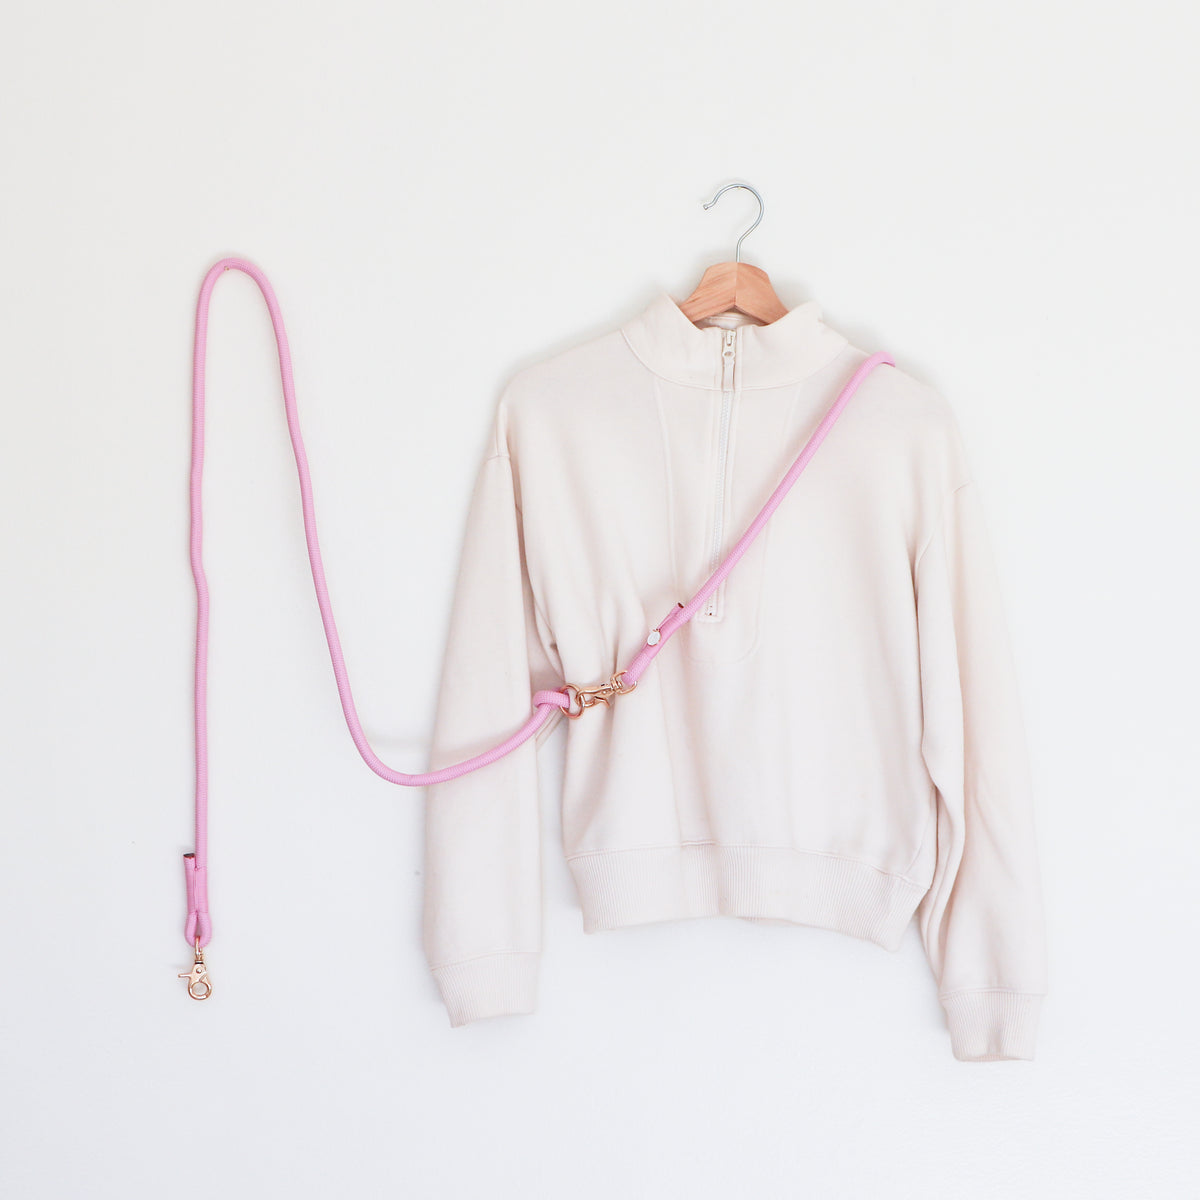 'Baby Pink' - Hands Free Braided Leash - FURLOU 